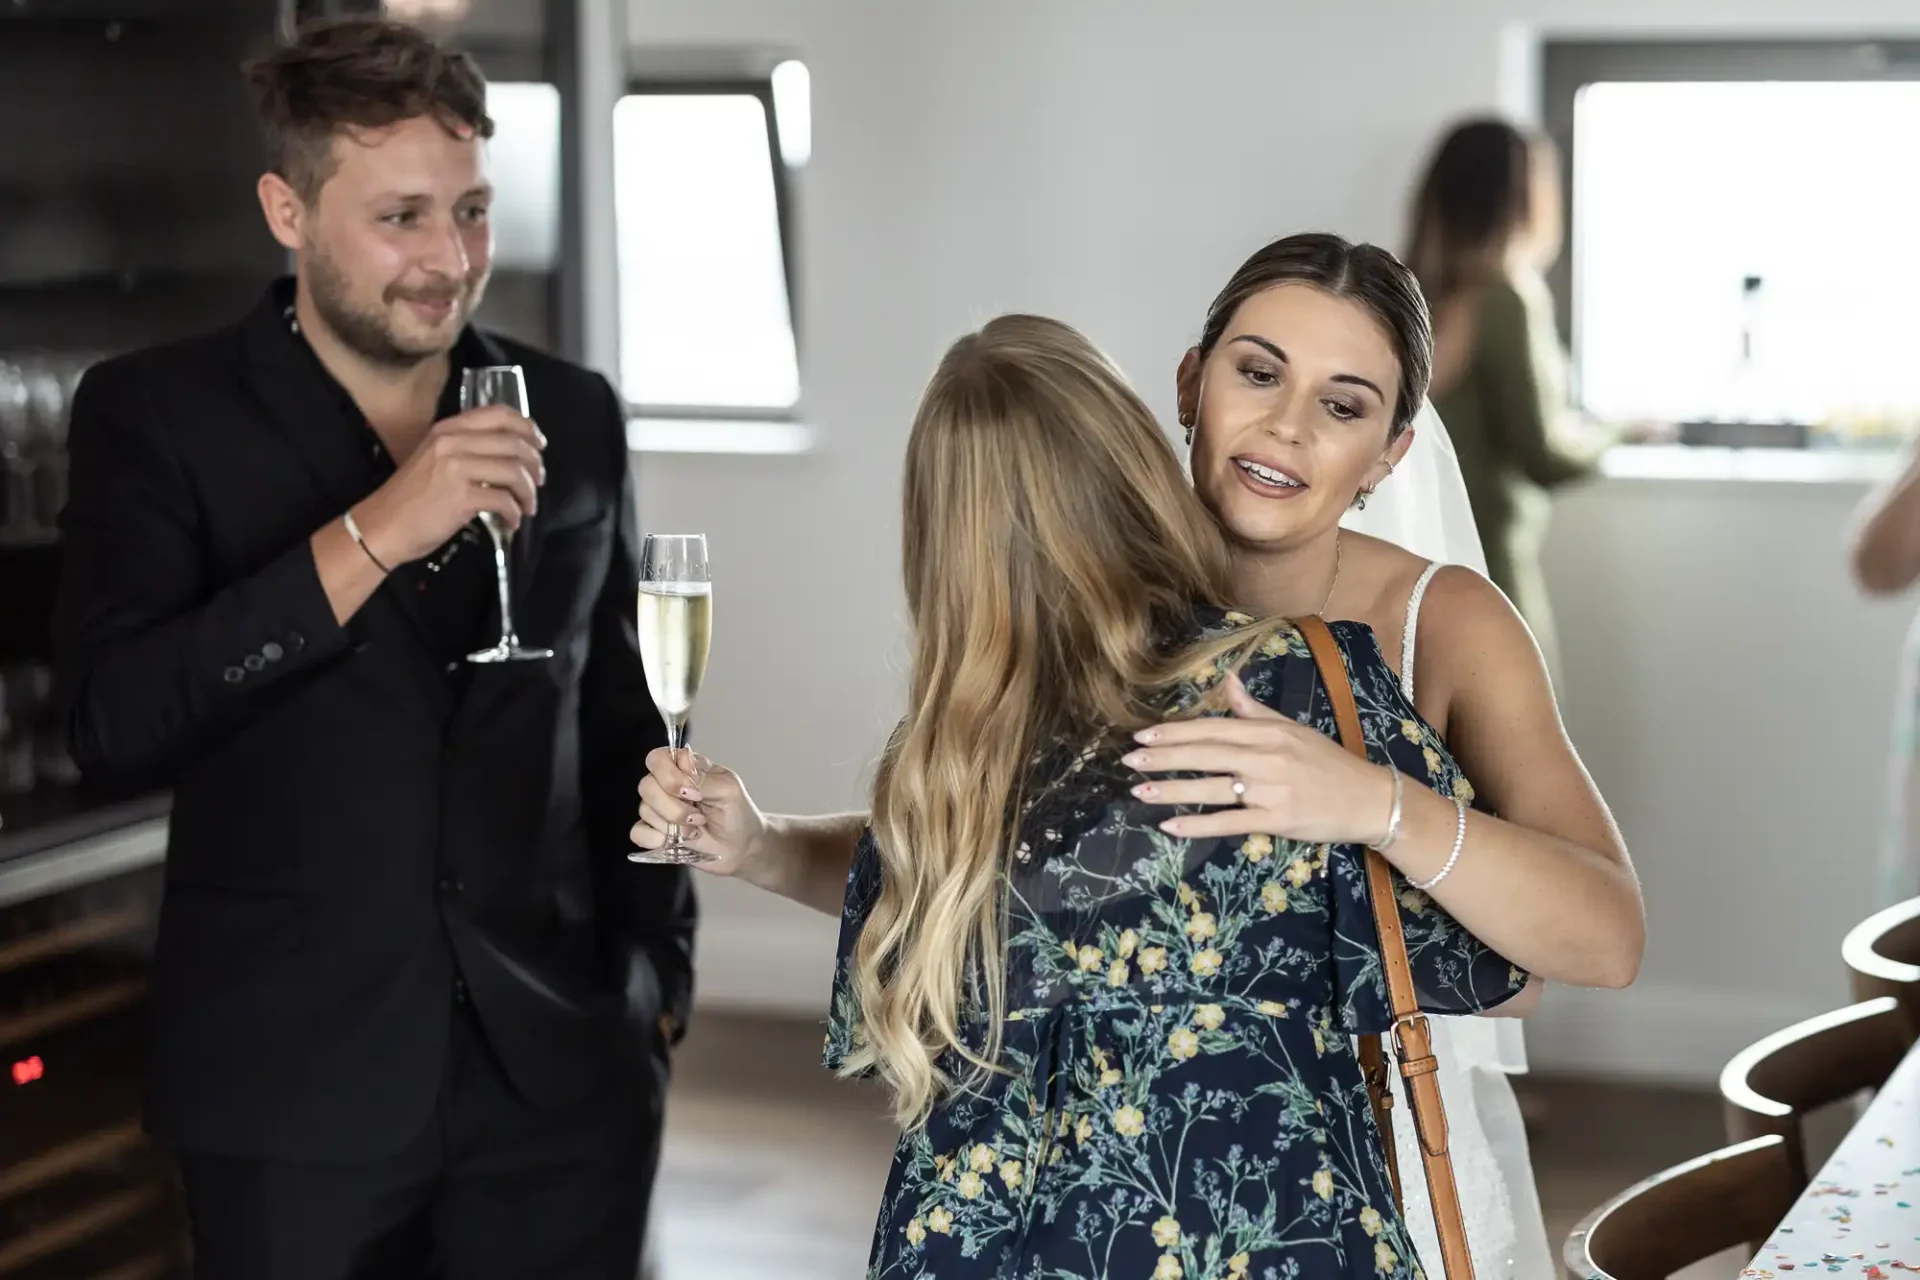 Two women and a man in semi-formal attire holding champagne glasses at a social gathering, engaging in a friendly hug and conversation.